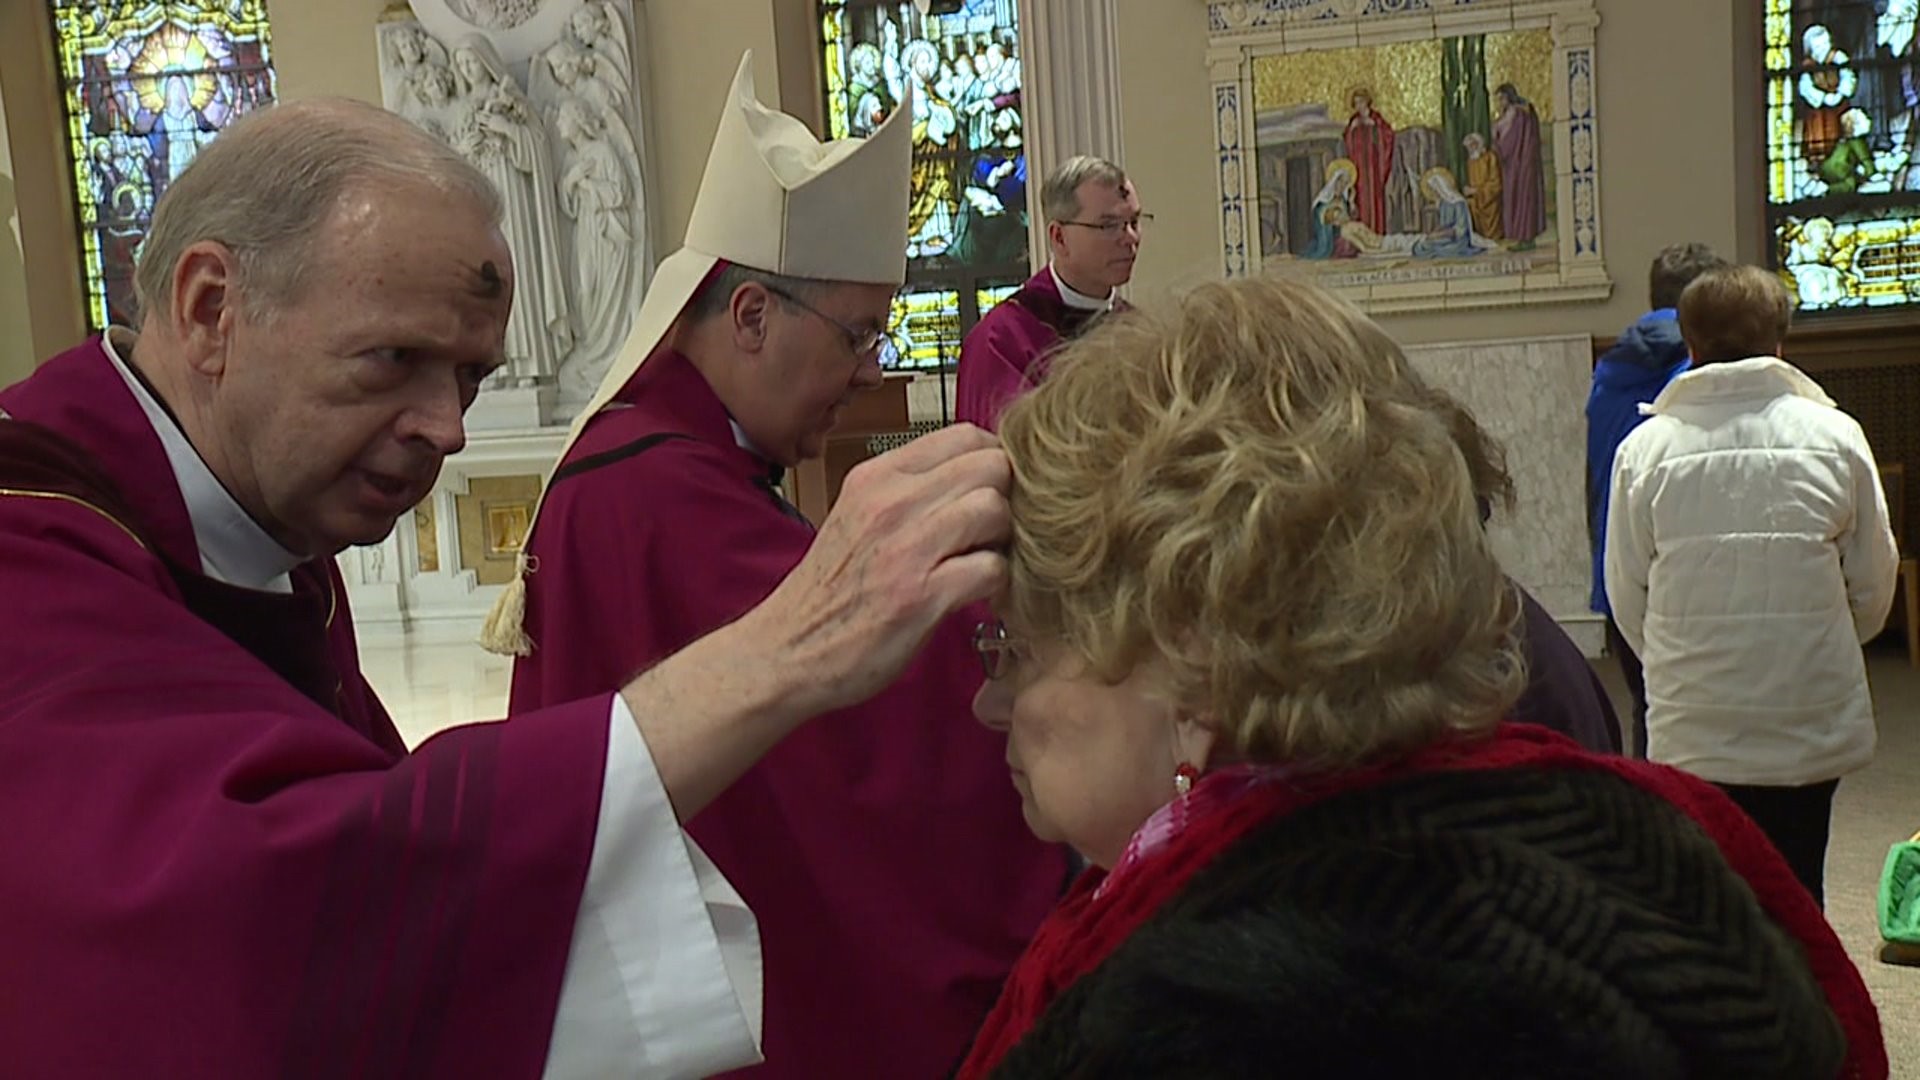 Catholics Observe Ash Wednesday at St. Peter's Cathedral